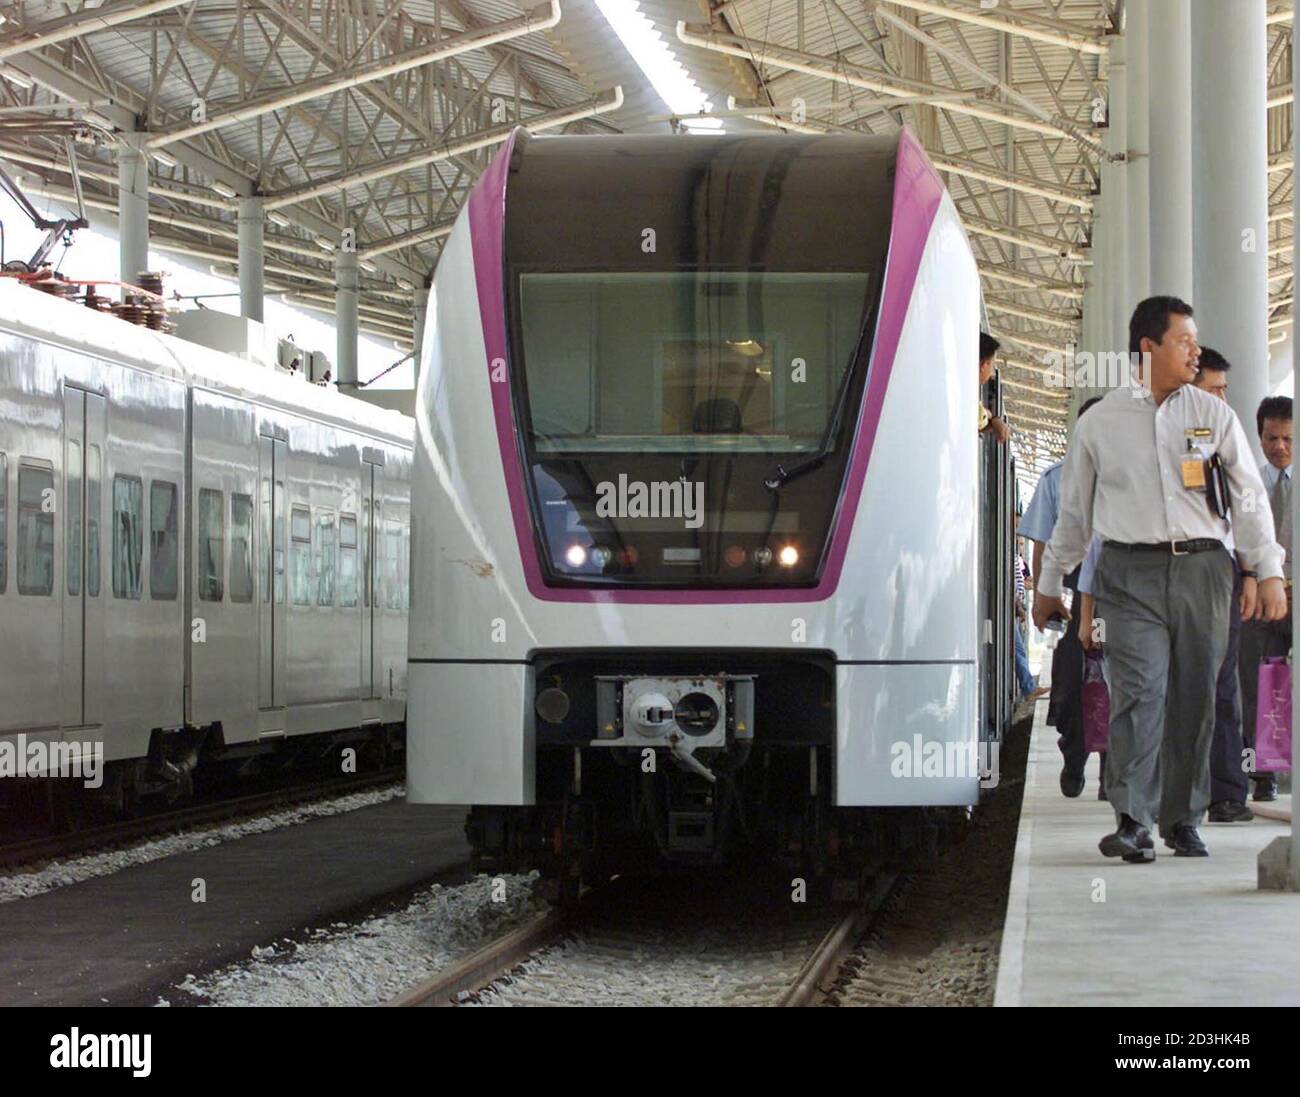 Passengers Disembark From The New Klia Express Train During A Trial Run At Its Station Depot In Salak Tinggi January 12 2002 Express Rail Link Or Erl Is A Rail Air Connection Train